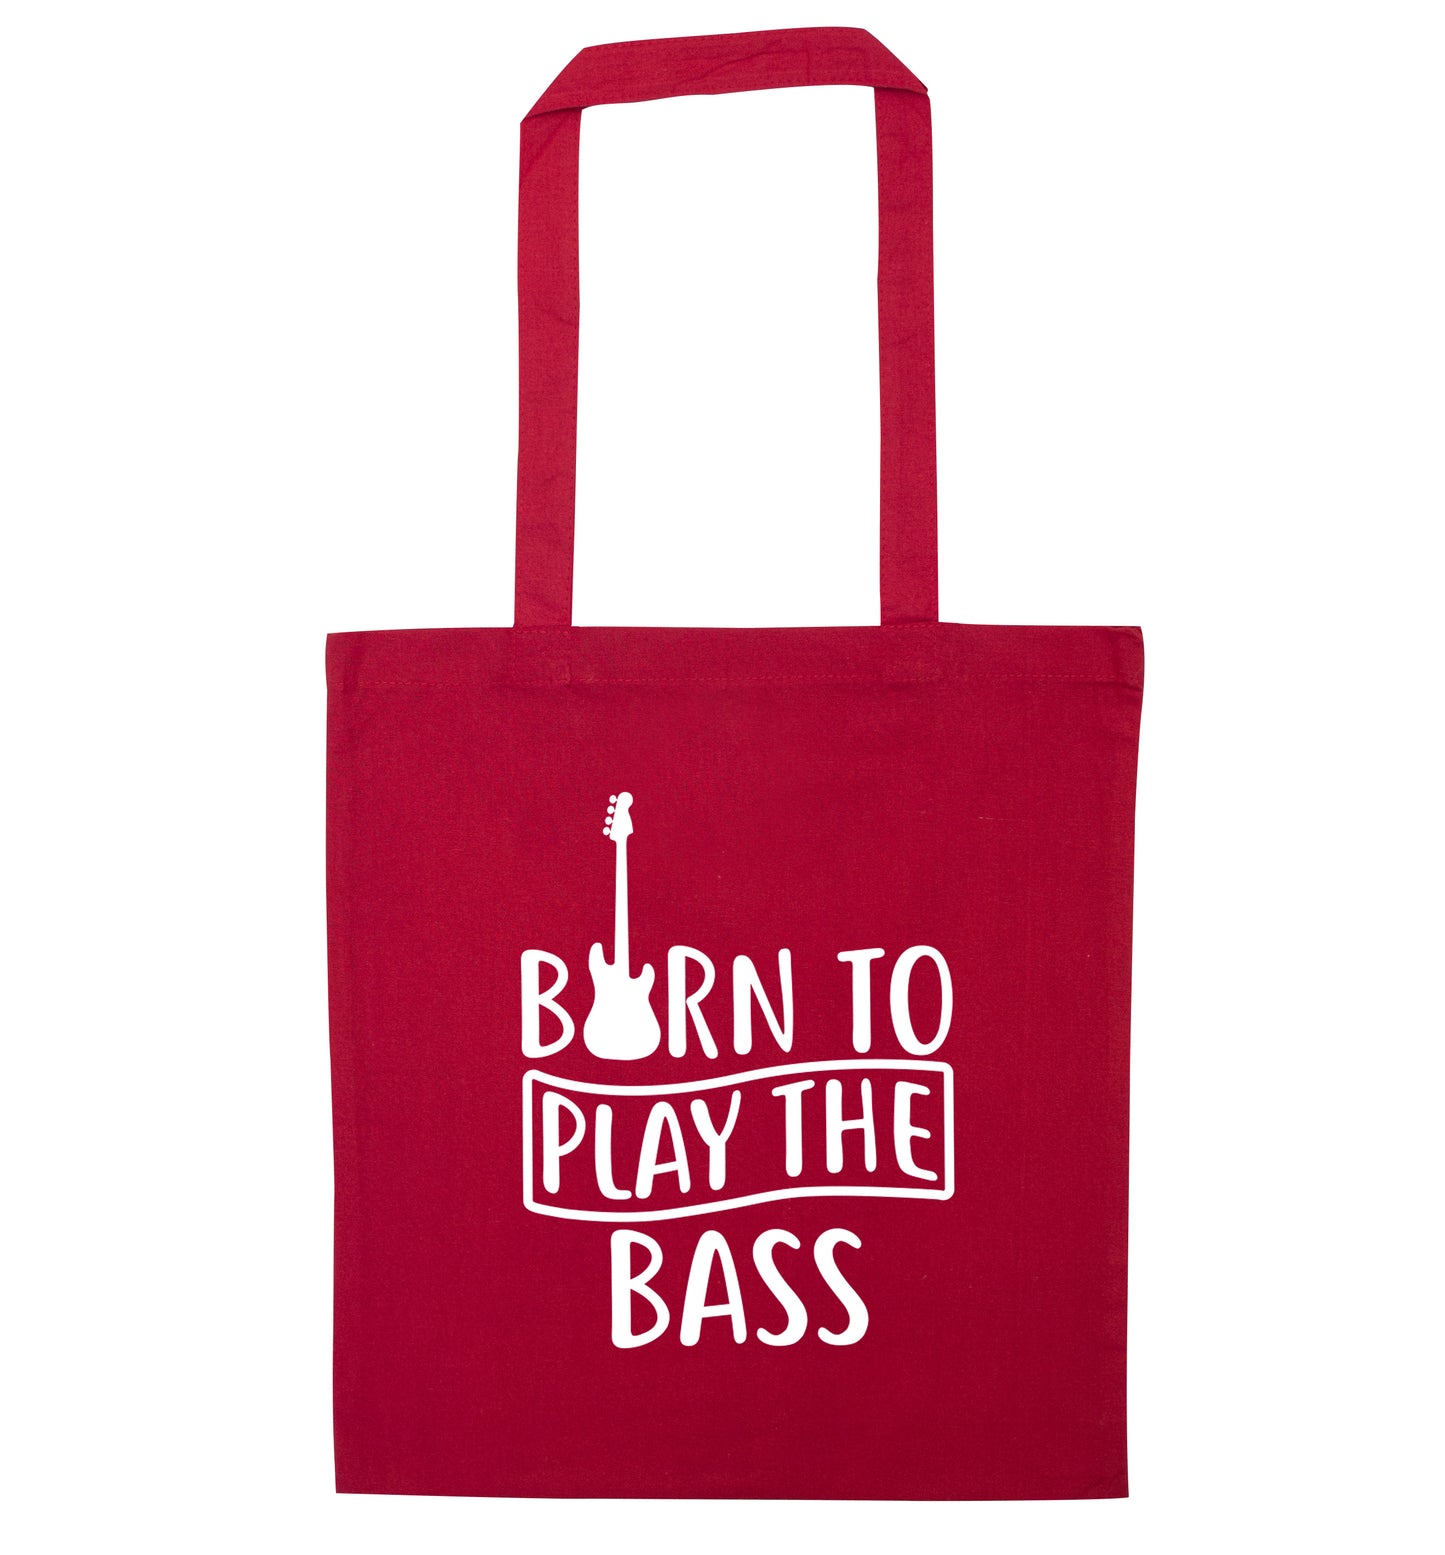 Born to play the bass red tote bag